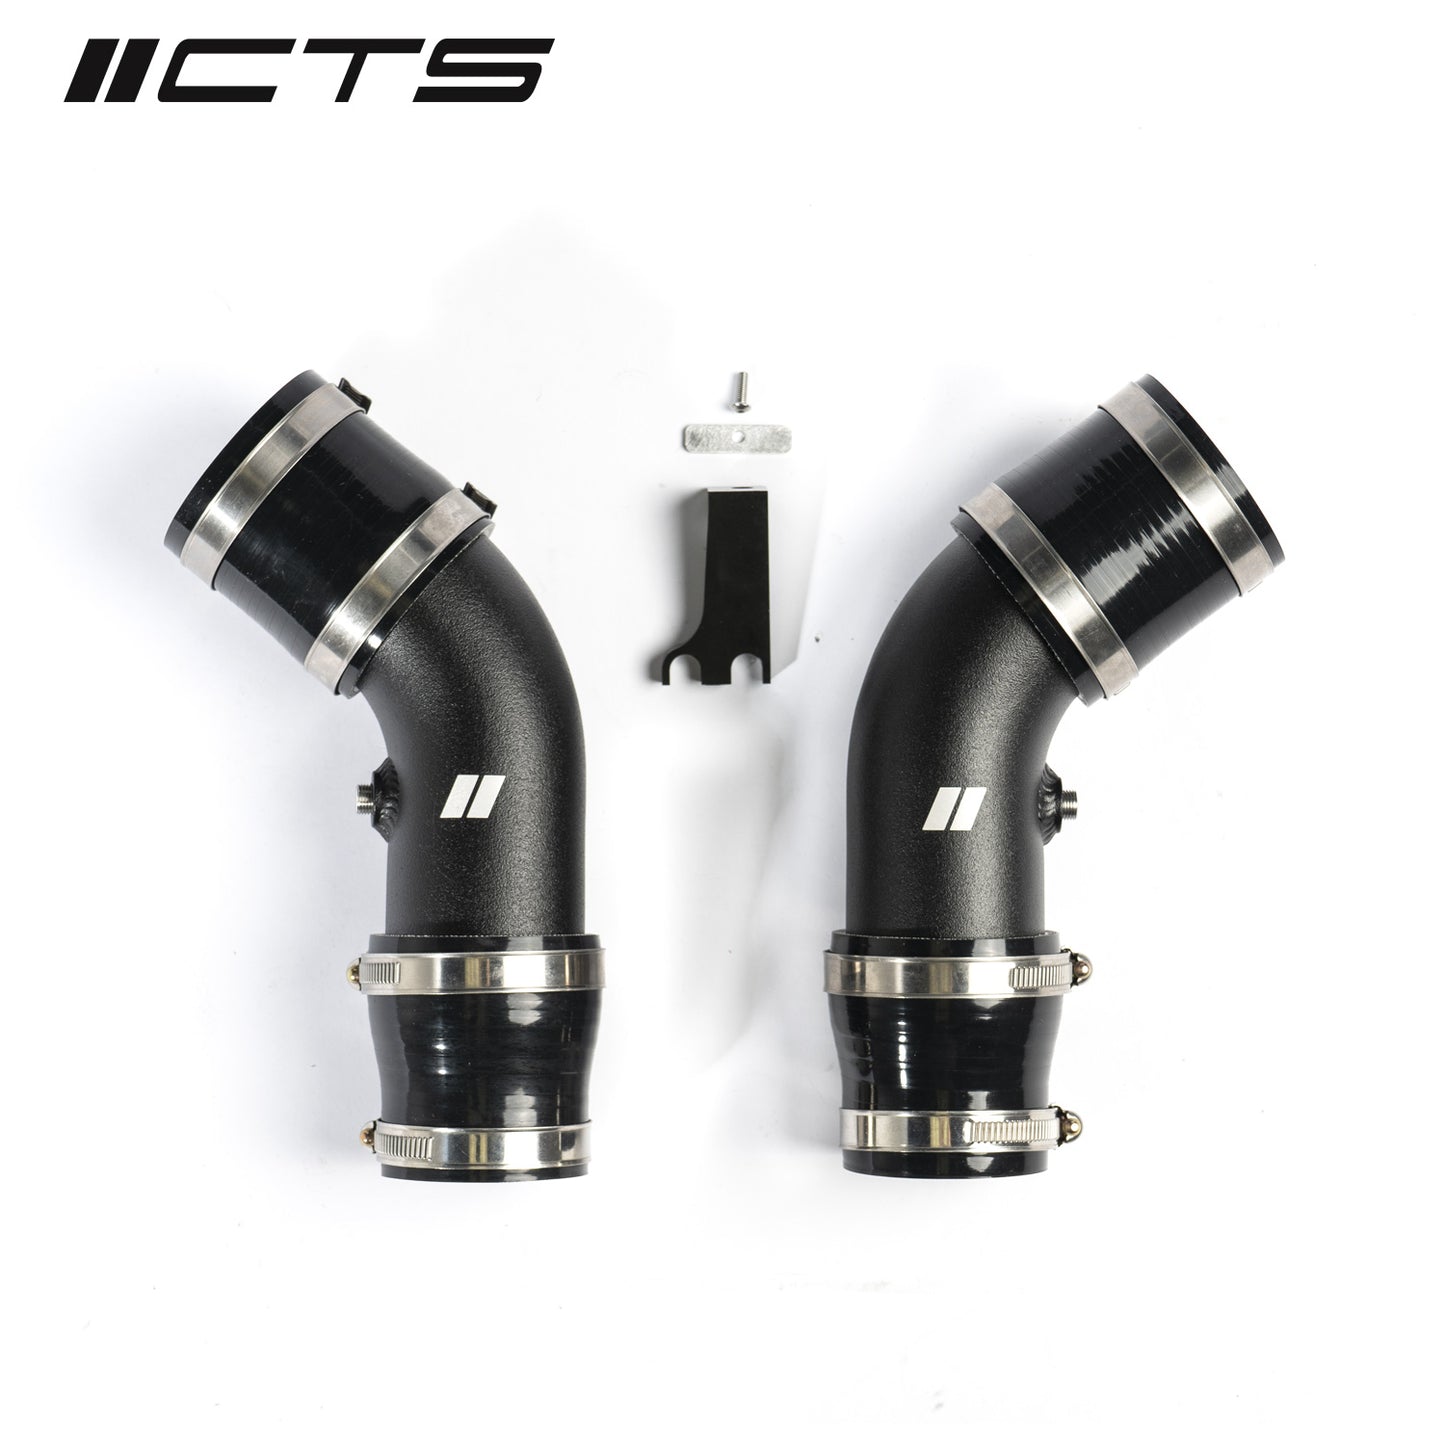 CTS Turbo S63 Chargepipe Upgrade Kit (BMW M5 / M6 F10 / F12 / F13)